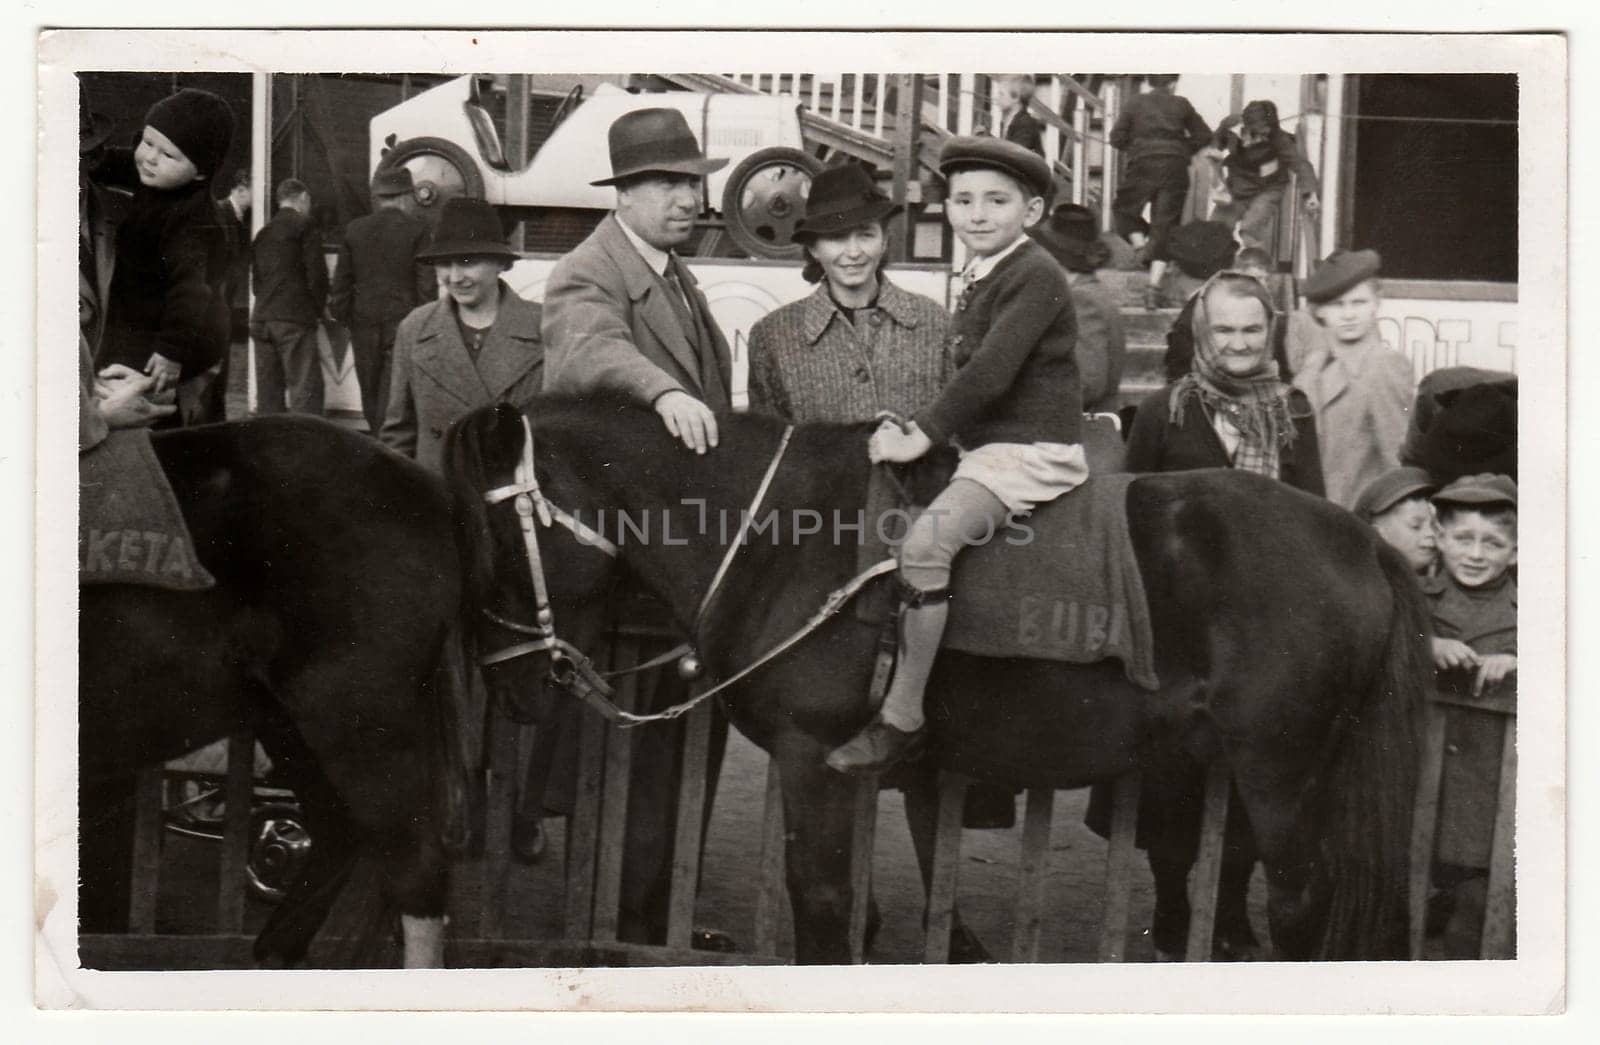 Vintage photo shows family in amusement park. A small boy sits on horse. by roman_nerud